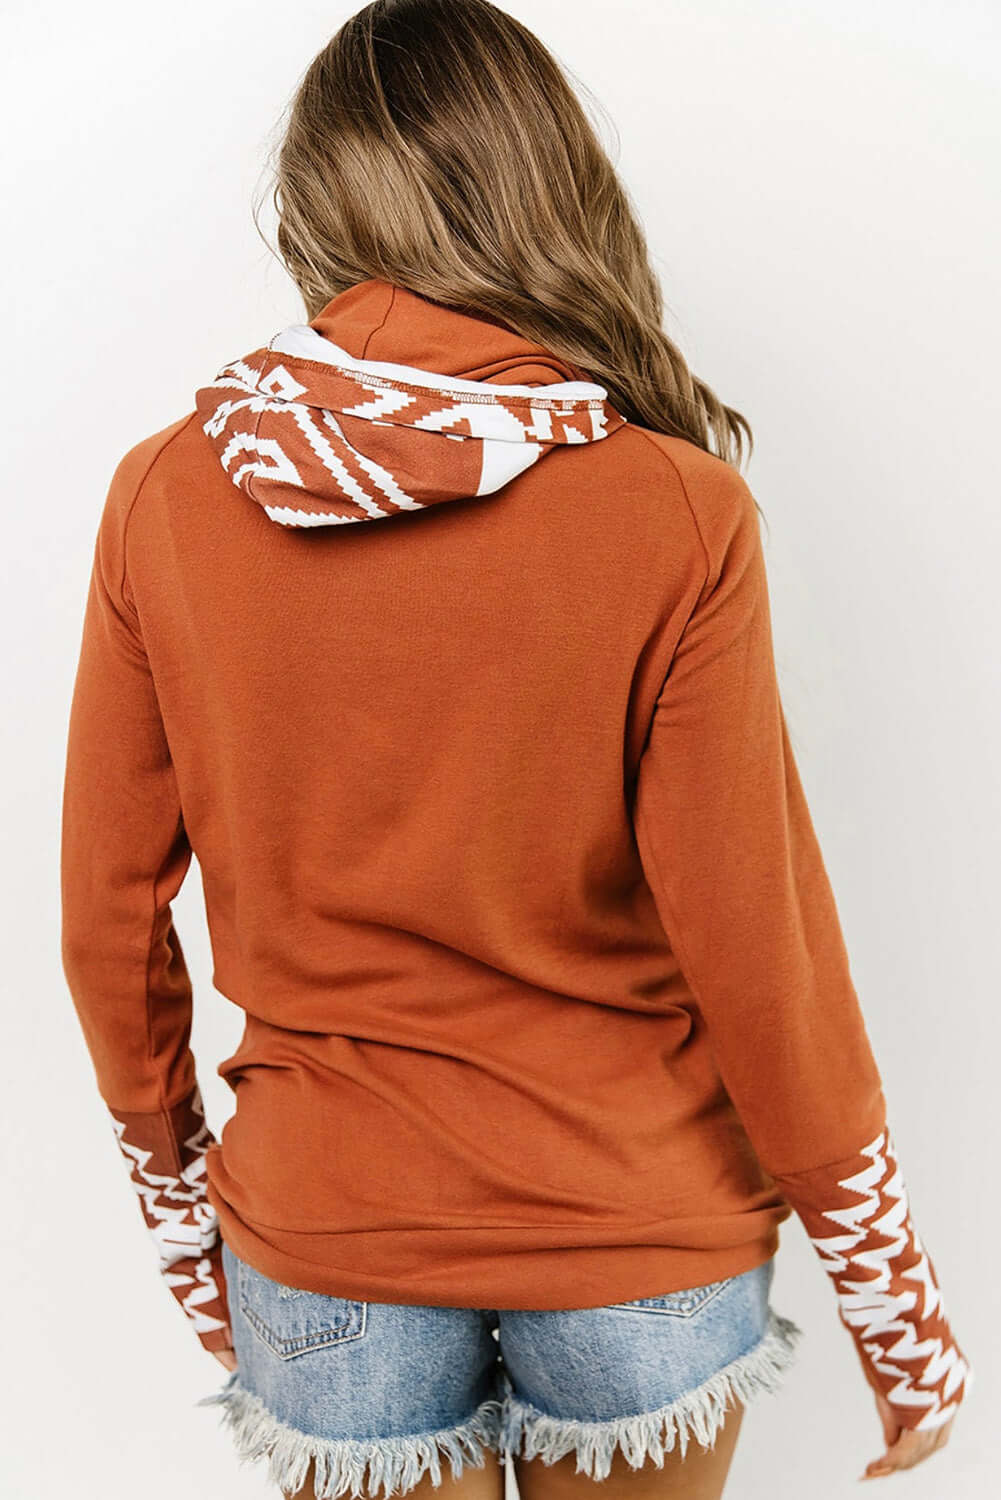 Brown Aztec Print Patchwork Thumb Hole Hoodie - Dixie Hike & Style